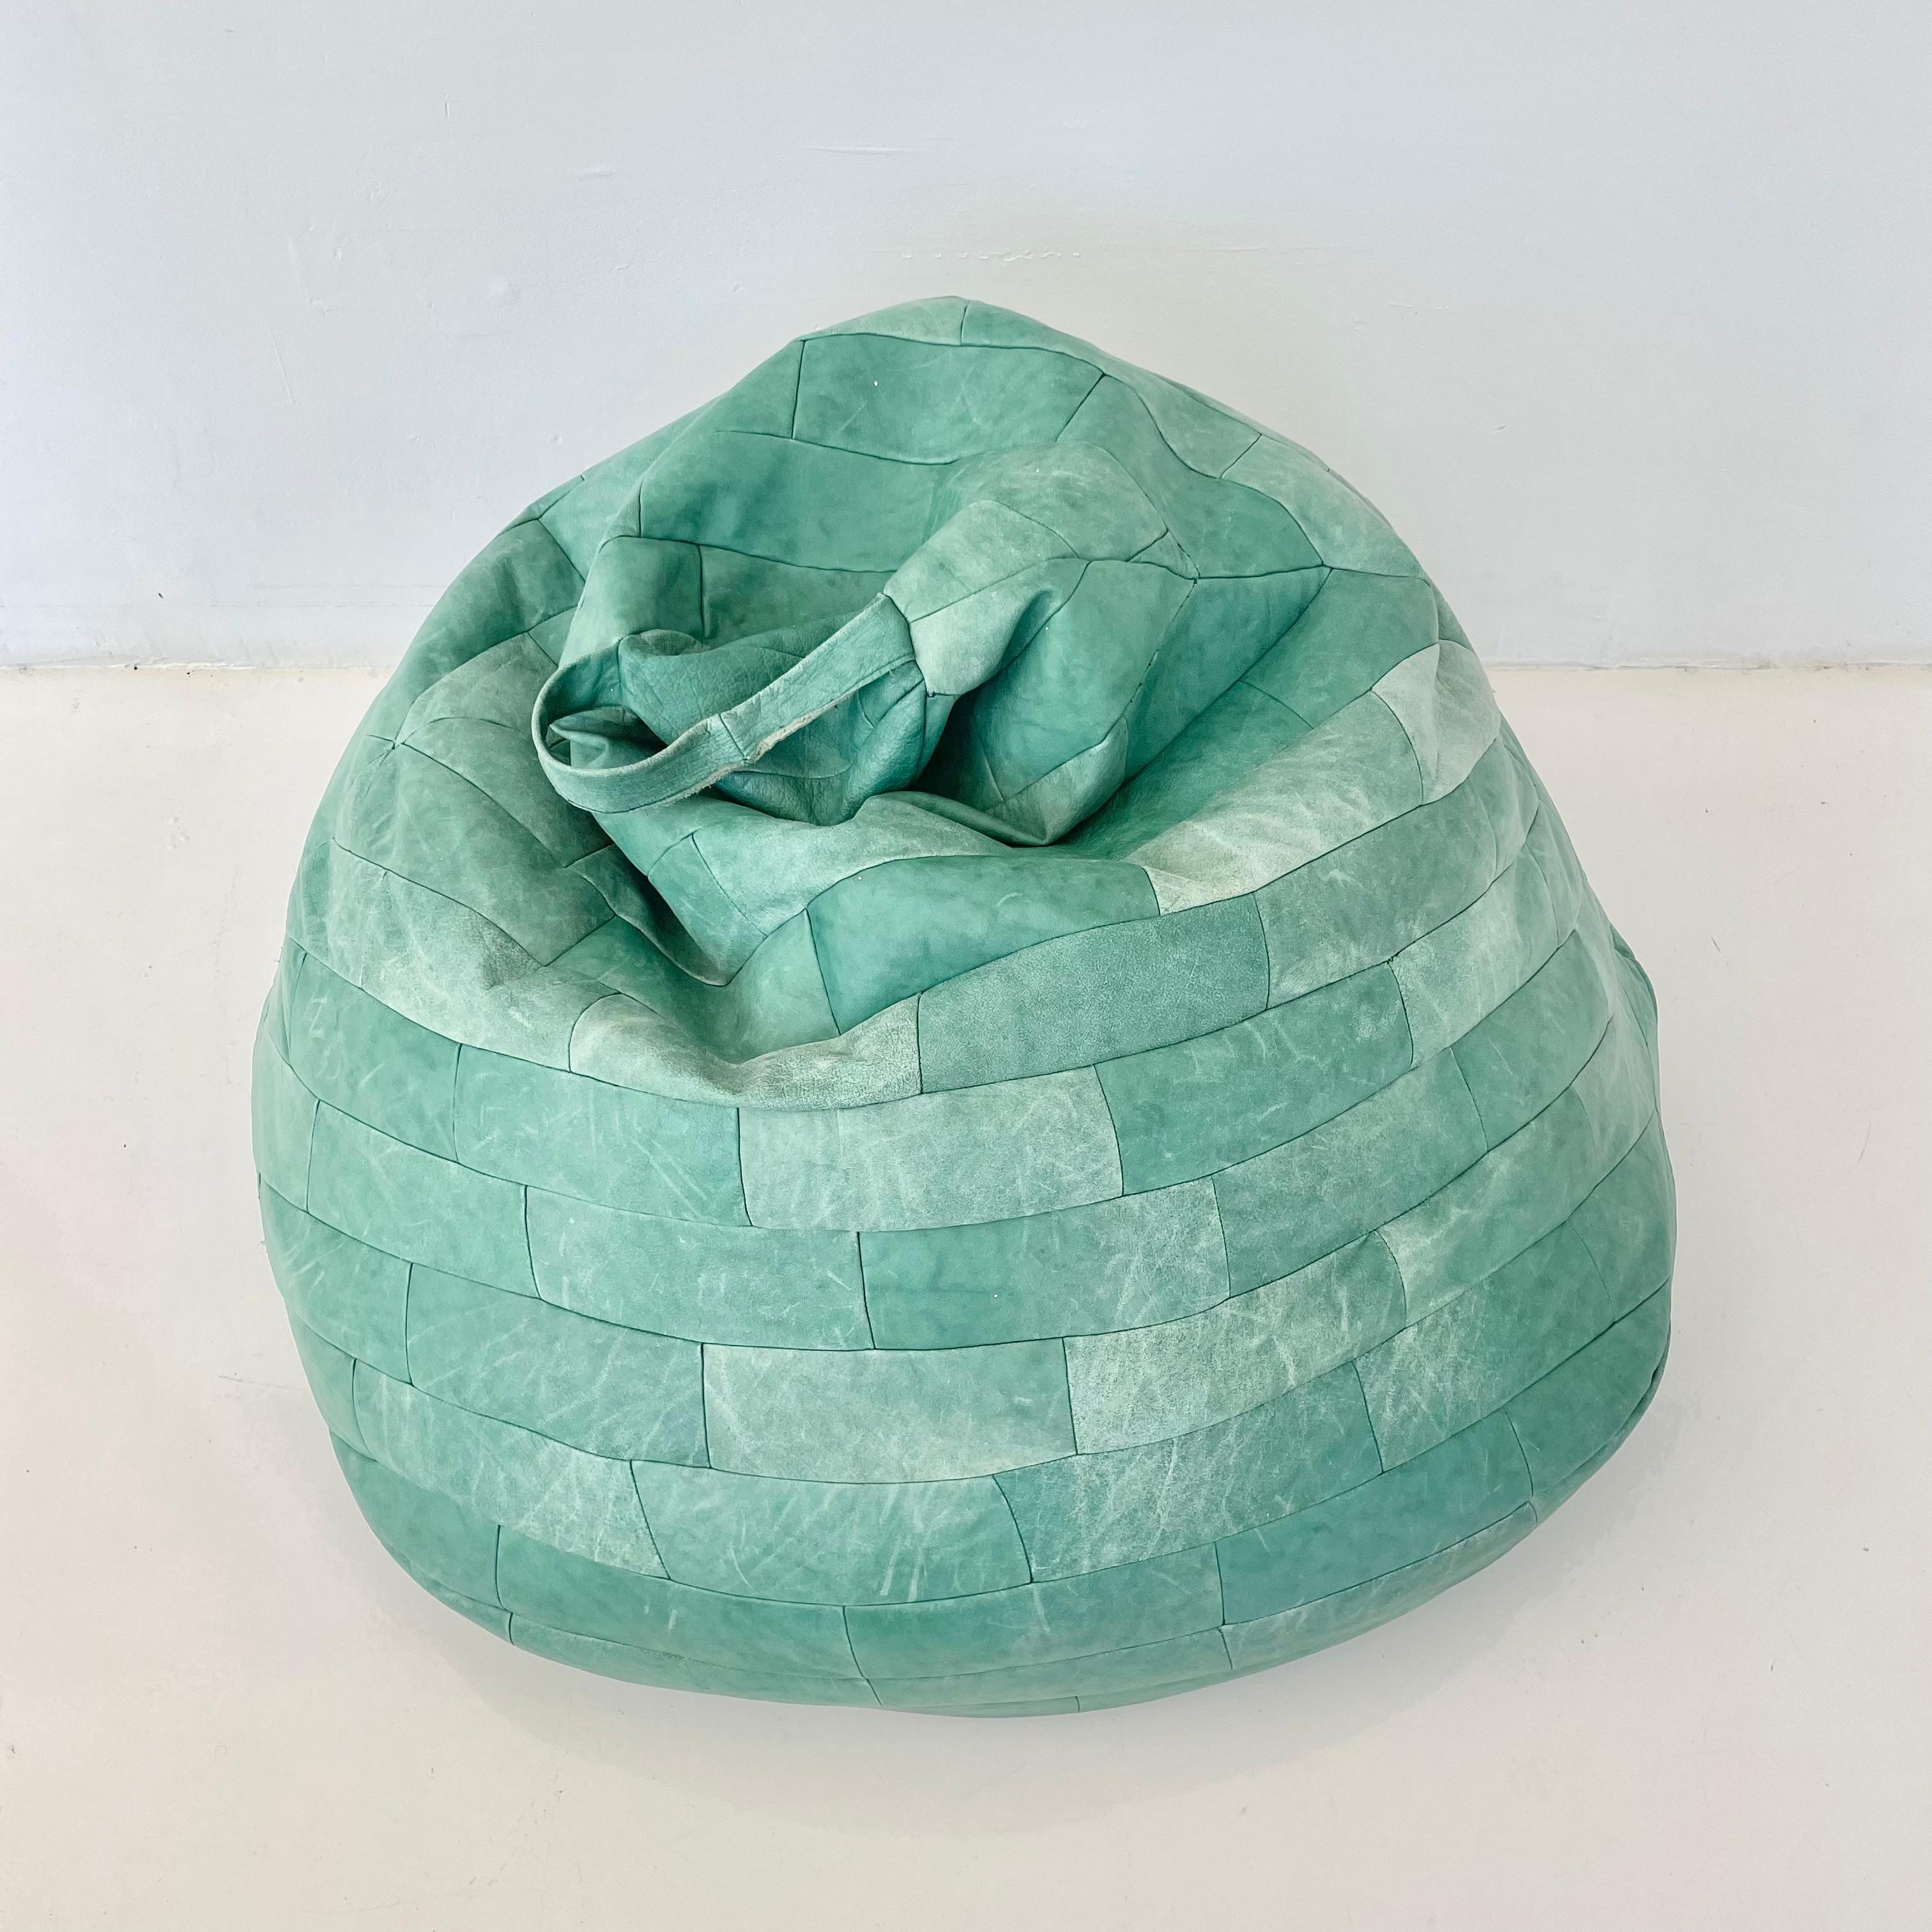 Gorgeous oversized 70s powder green leather patchwork bean bag by De Sede. Great coloring and patina to leather. Good vintage condition. Wear to leather as shown. Extremely comfortable. Fun accent piece.

Newly stuffed with foam beads and slip